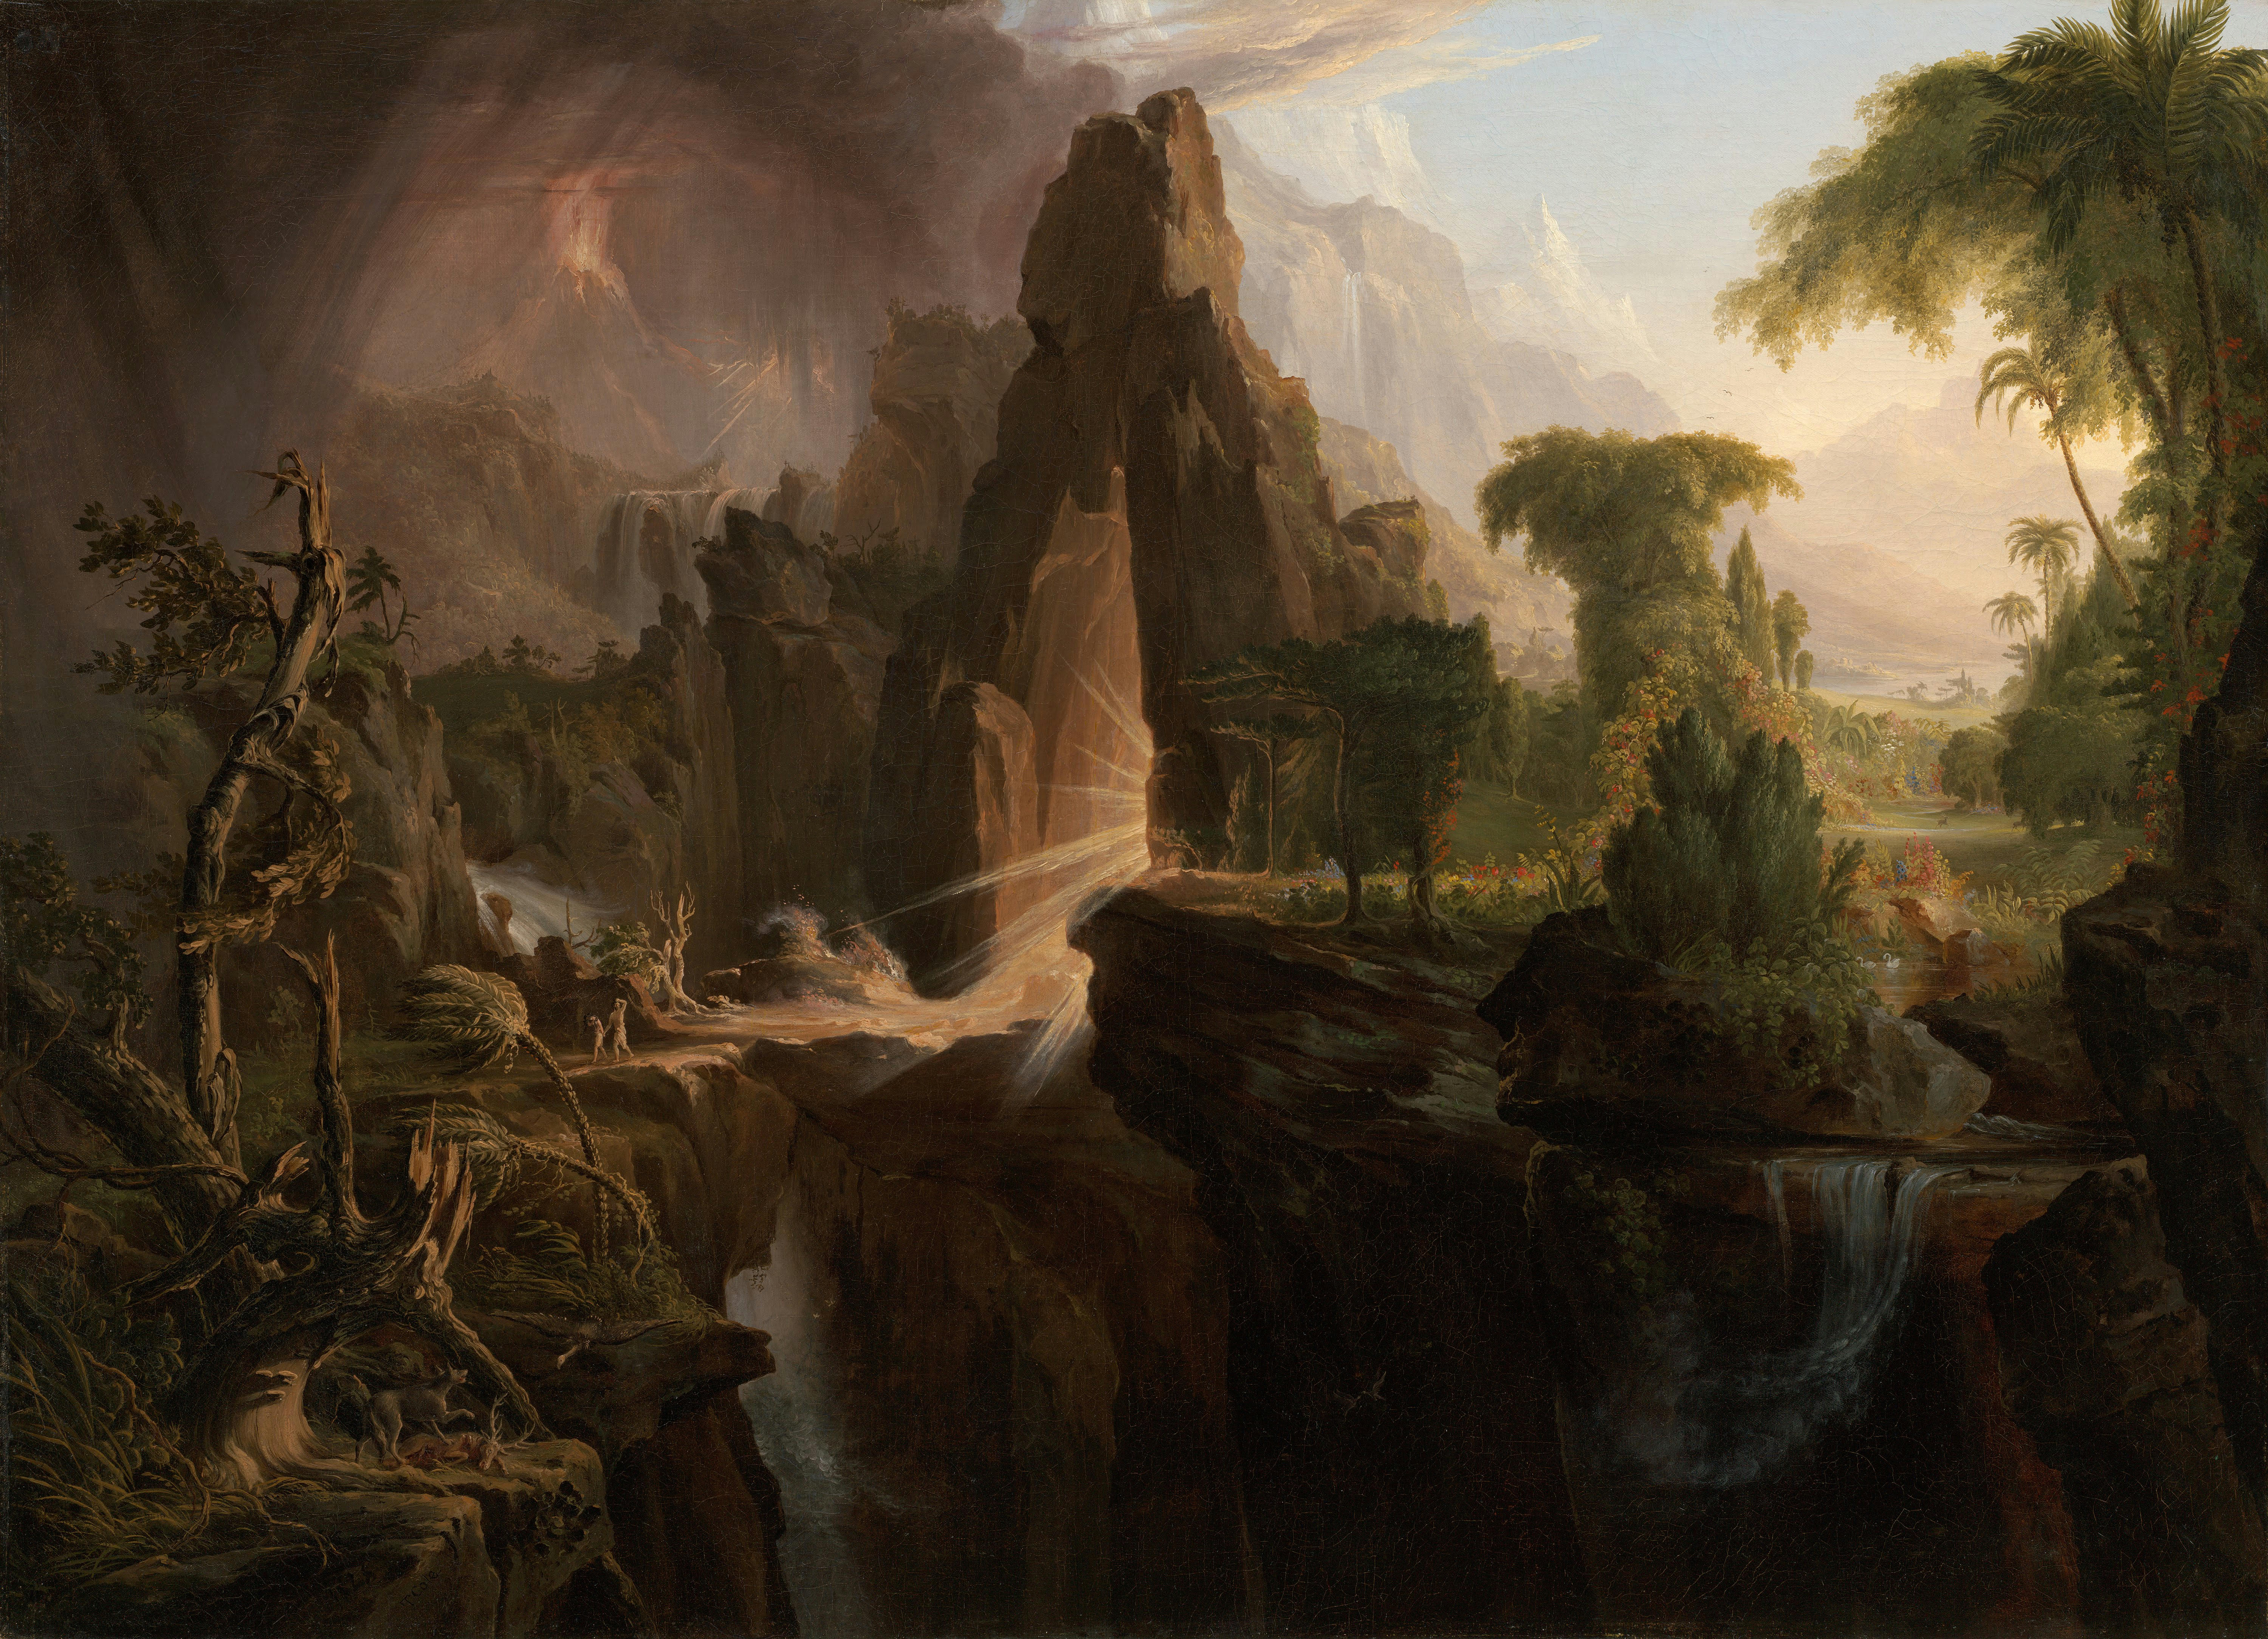 Image:Cole Thomas Expulsion from the Garden of Eden 1828.jpg